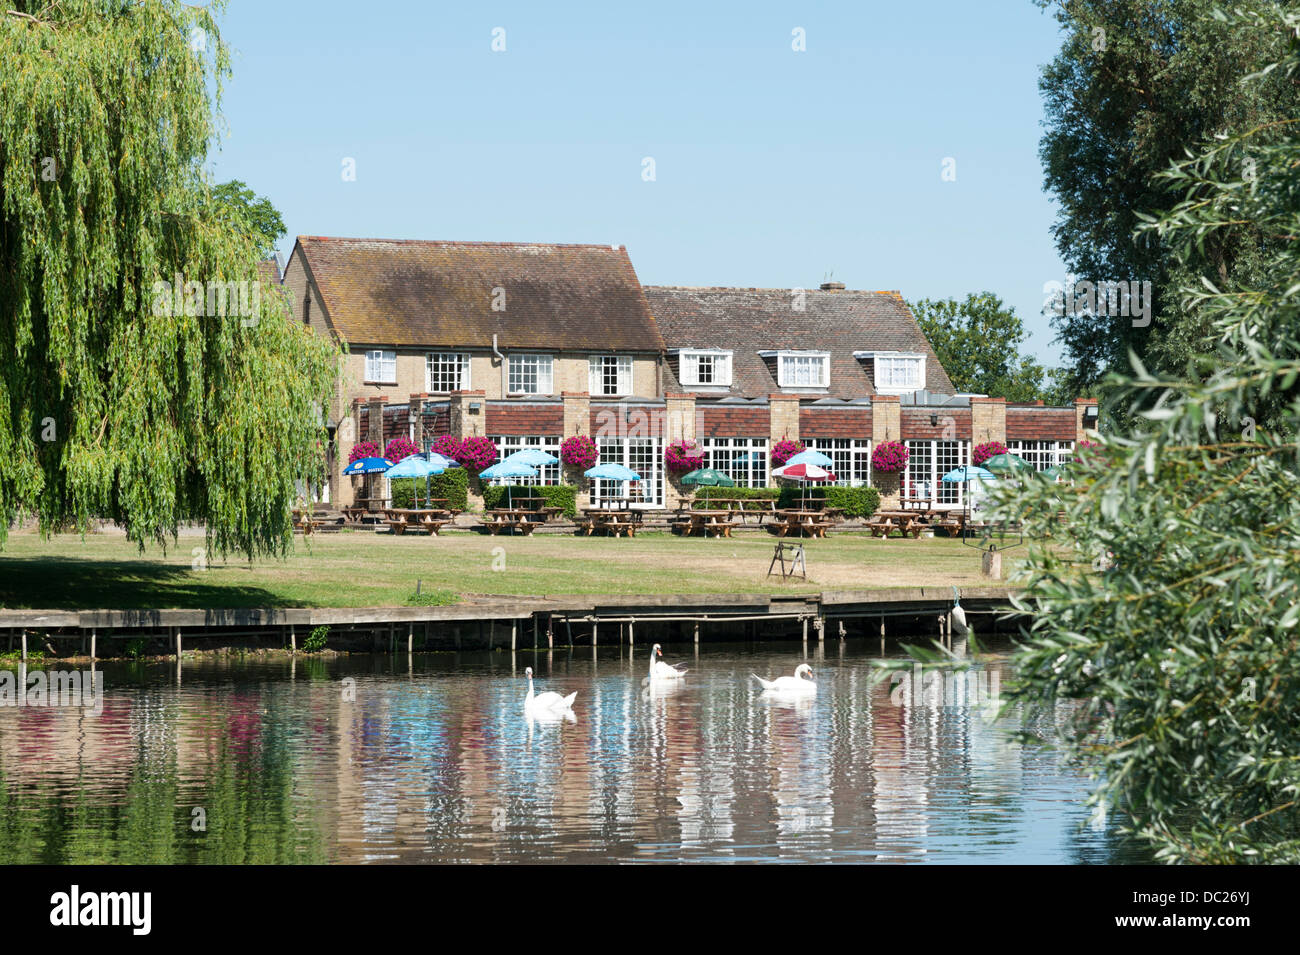 The Pike and Eel pub, hotel and marina on the River Great Ouse at Overcote Lane Needingworth Cambridgeshire UK Stock Photo